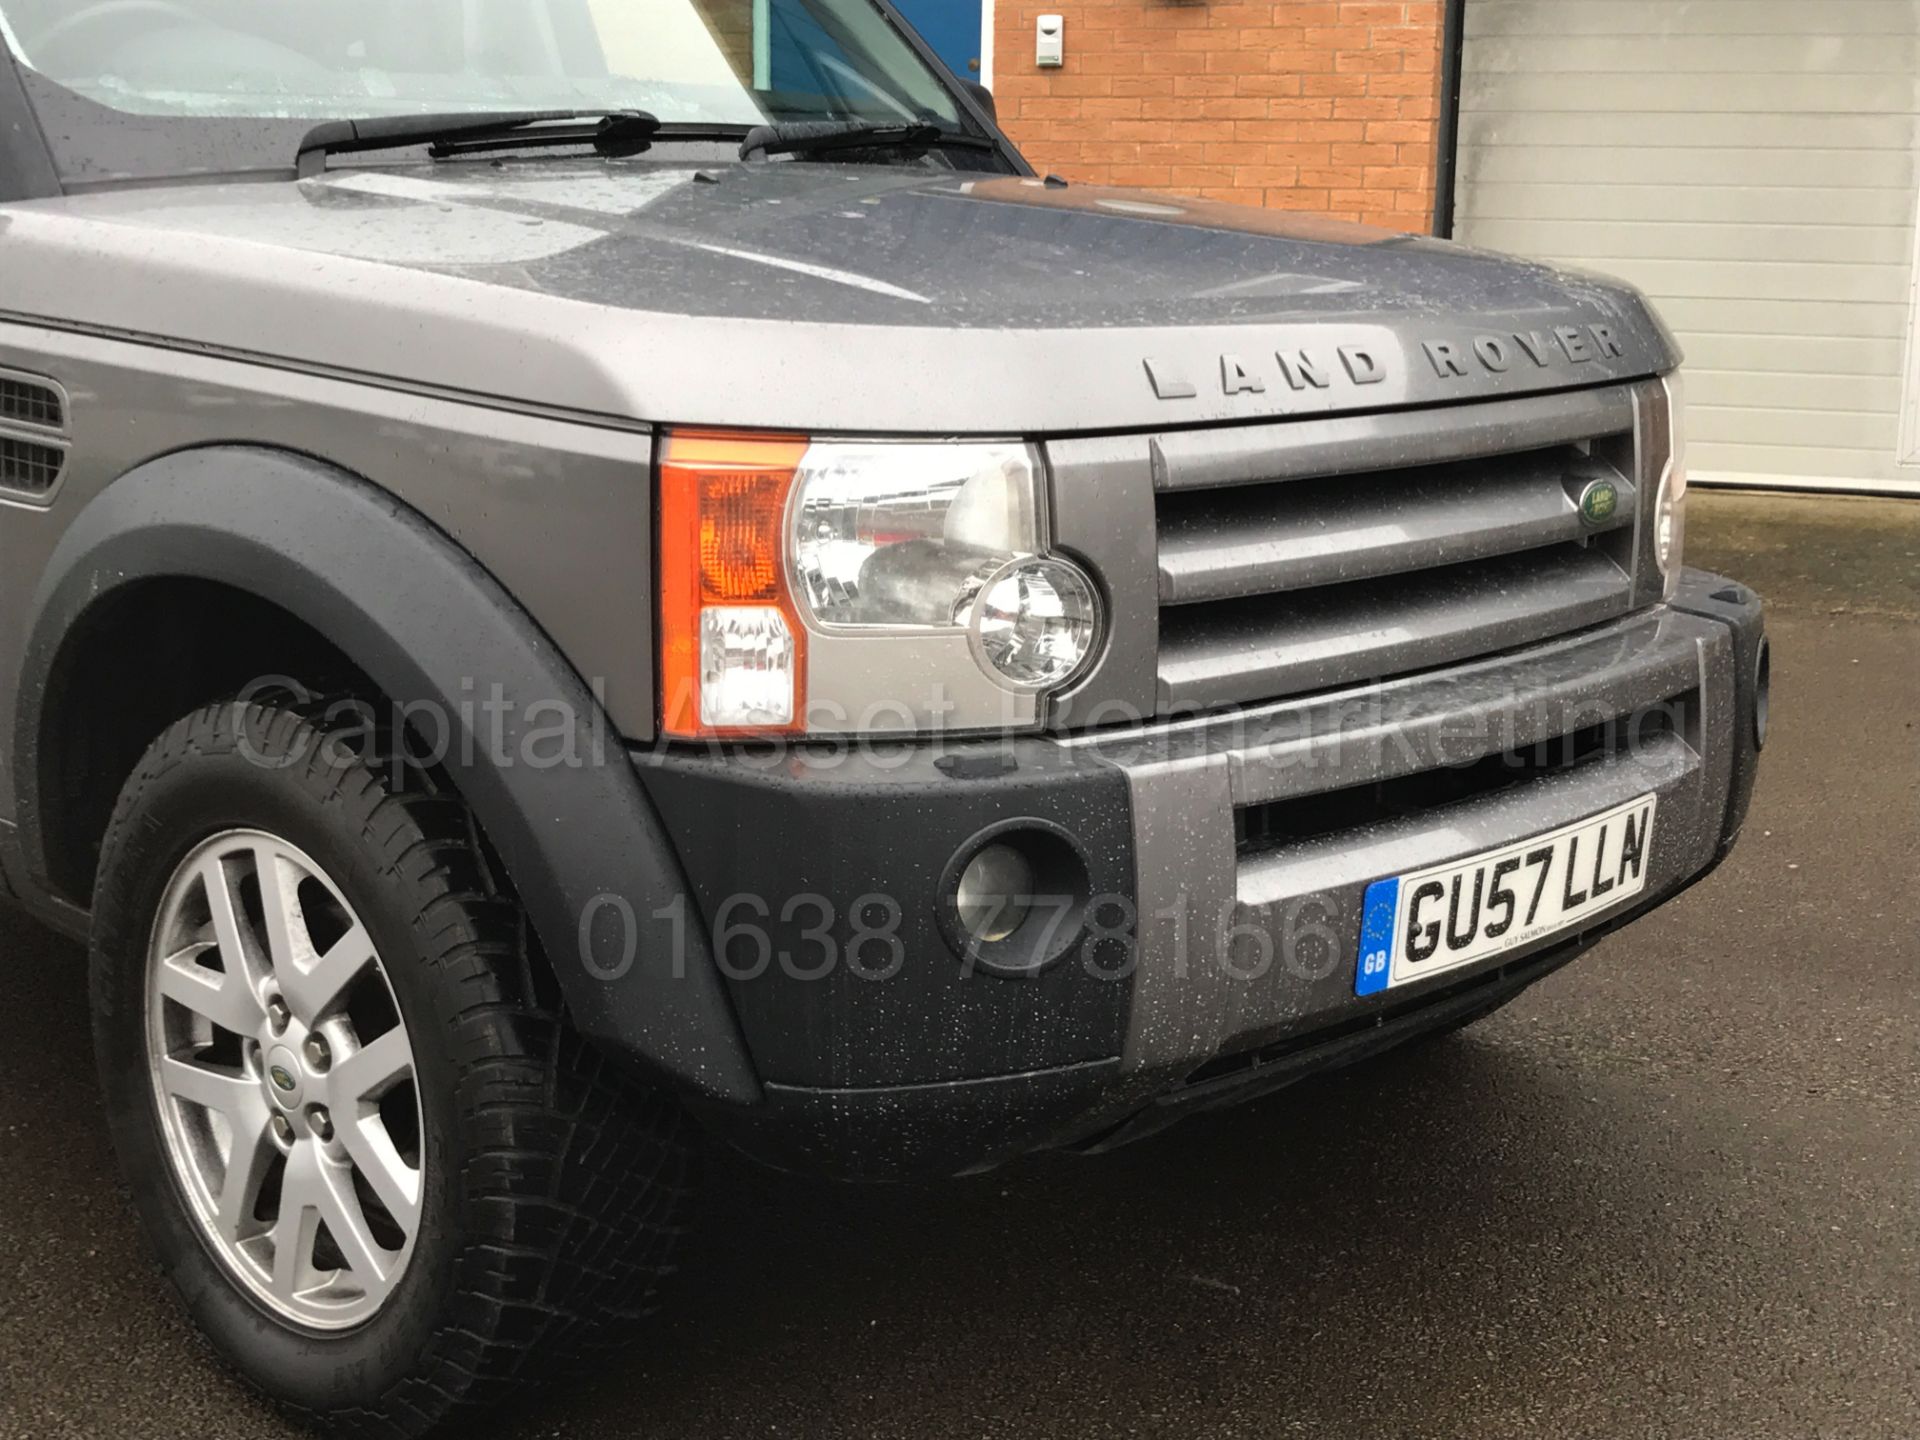 (On Sale) LAND ROVER DISCOVERY 3 XS 'COMMERCIAL' (2008 MODEL) 'TDV6 - 190 BHP - AUTO' - Image 11 of 30